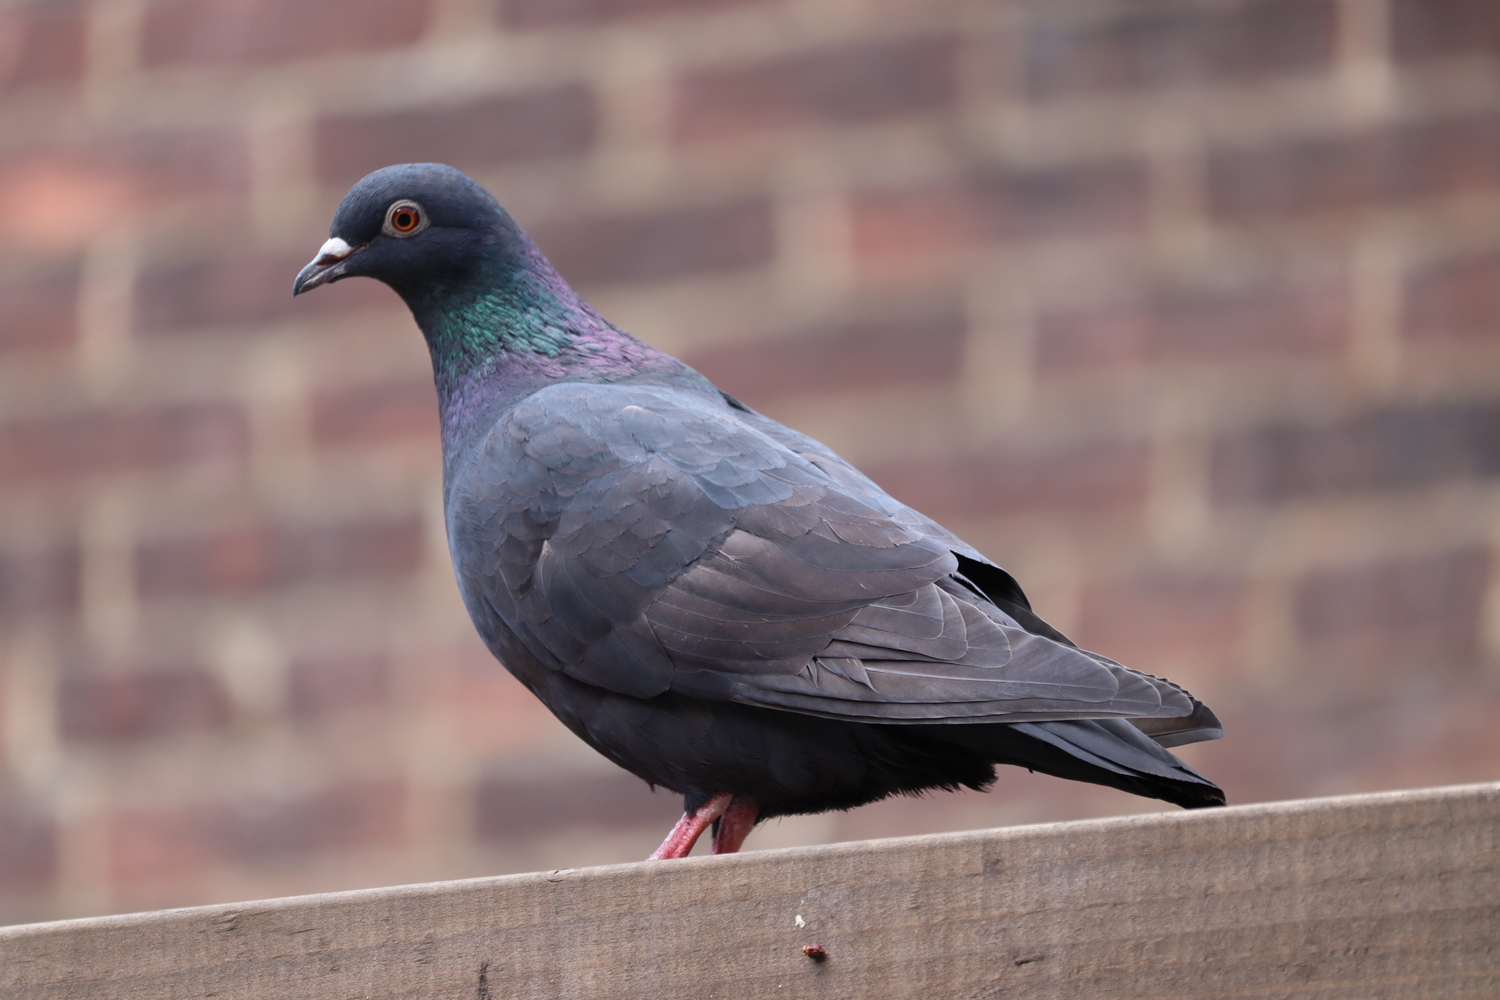 a standard issue city pigeon
viewed from the side,
standing atop a wooden fence
with a blurred brick wall behind it.